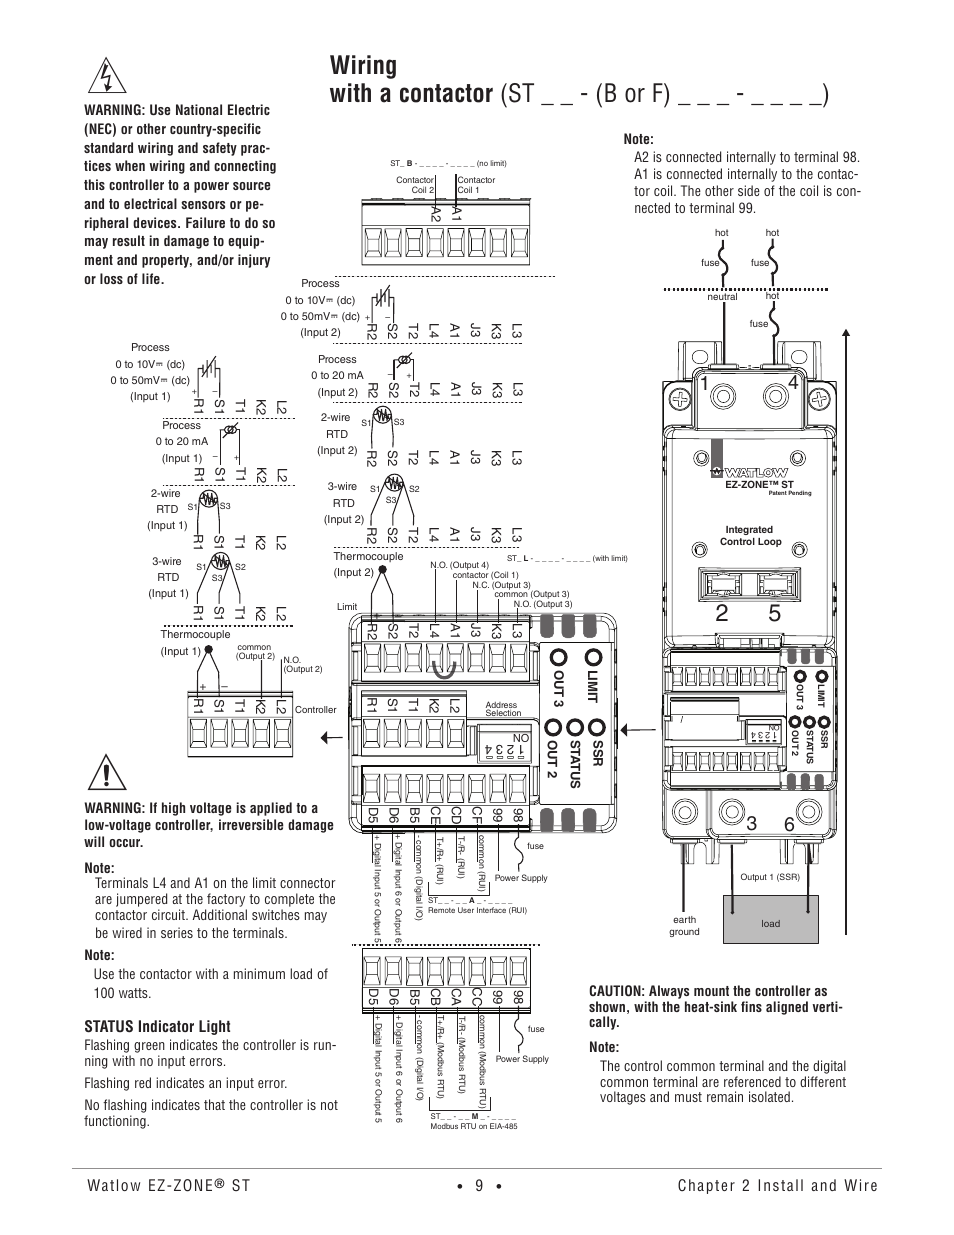 Wiring, Watlow ez-zone, Chapter 2 install and wire | Status indicator light | Watlow EZ-ZONE ST User Manual | Page 11 / 97